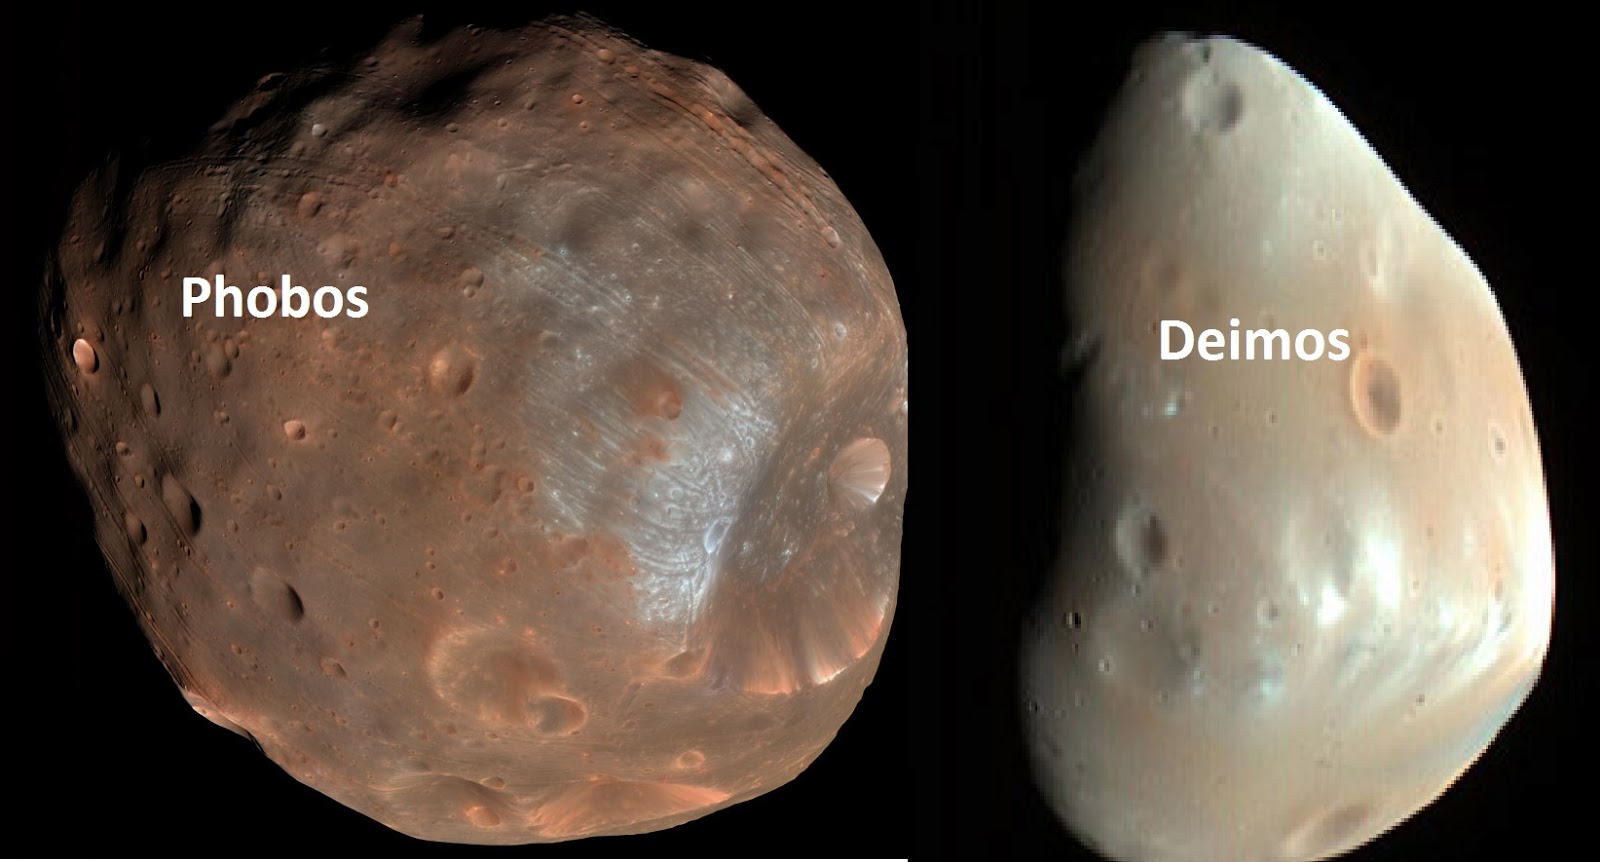 from mars moons phobos and deimos